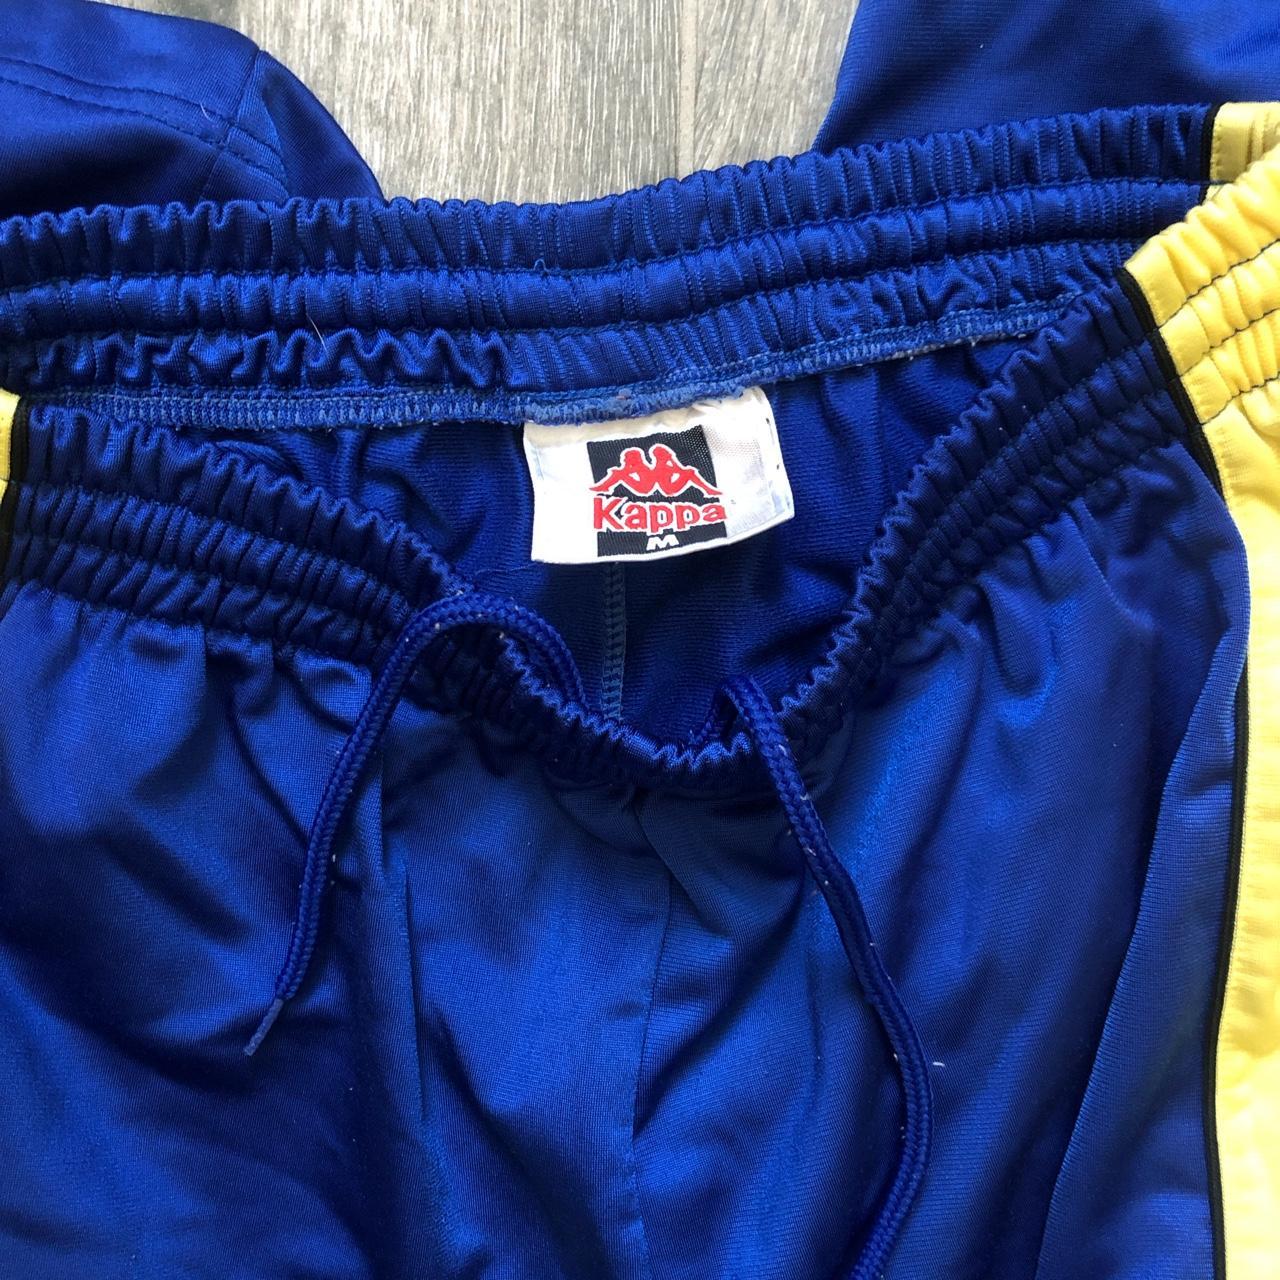 Kappa Men's Blue and Yellow Joggers-tracksuits | Depop